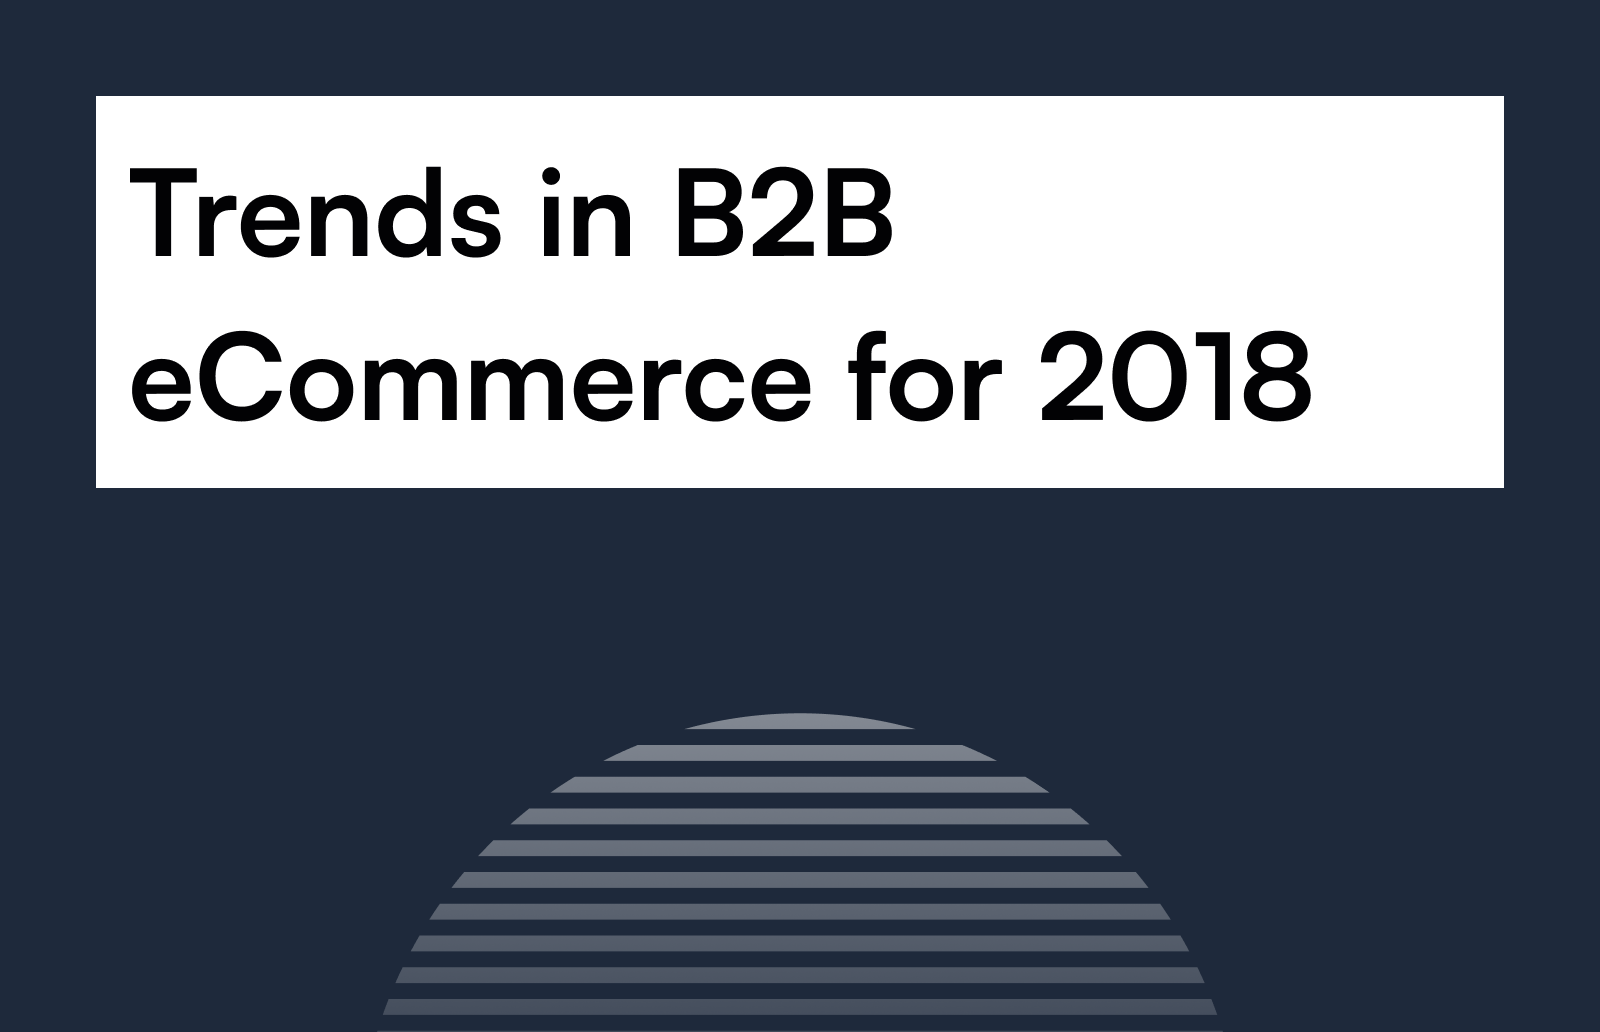 Trends in B2B eCommerce for 2018